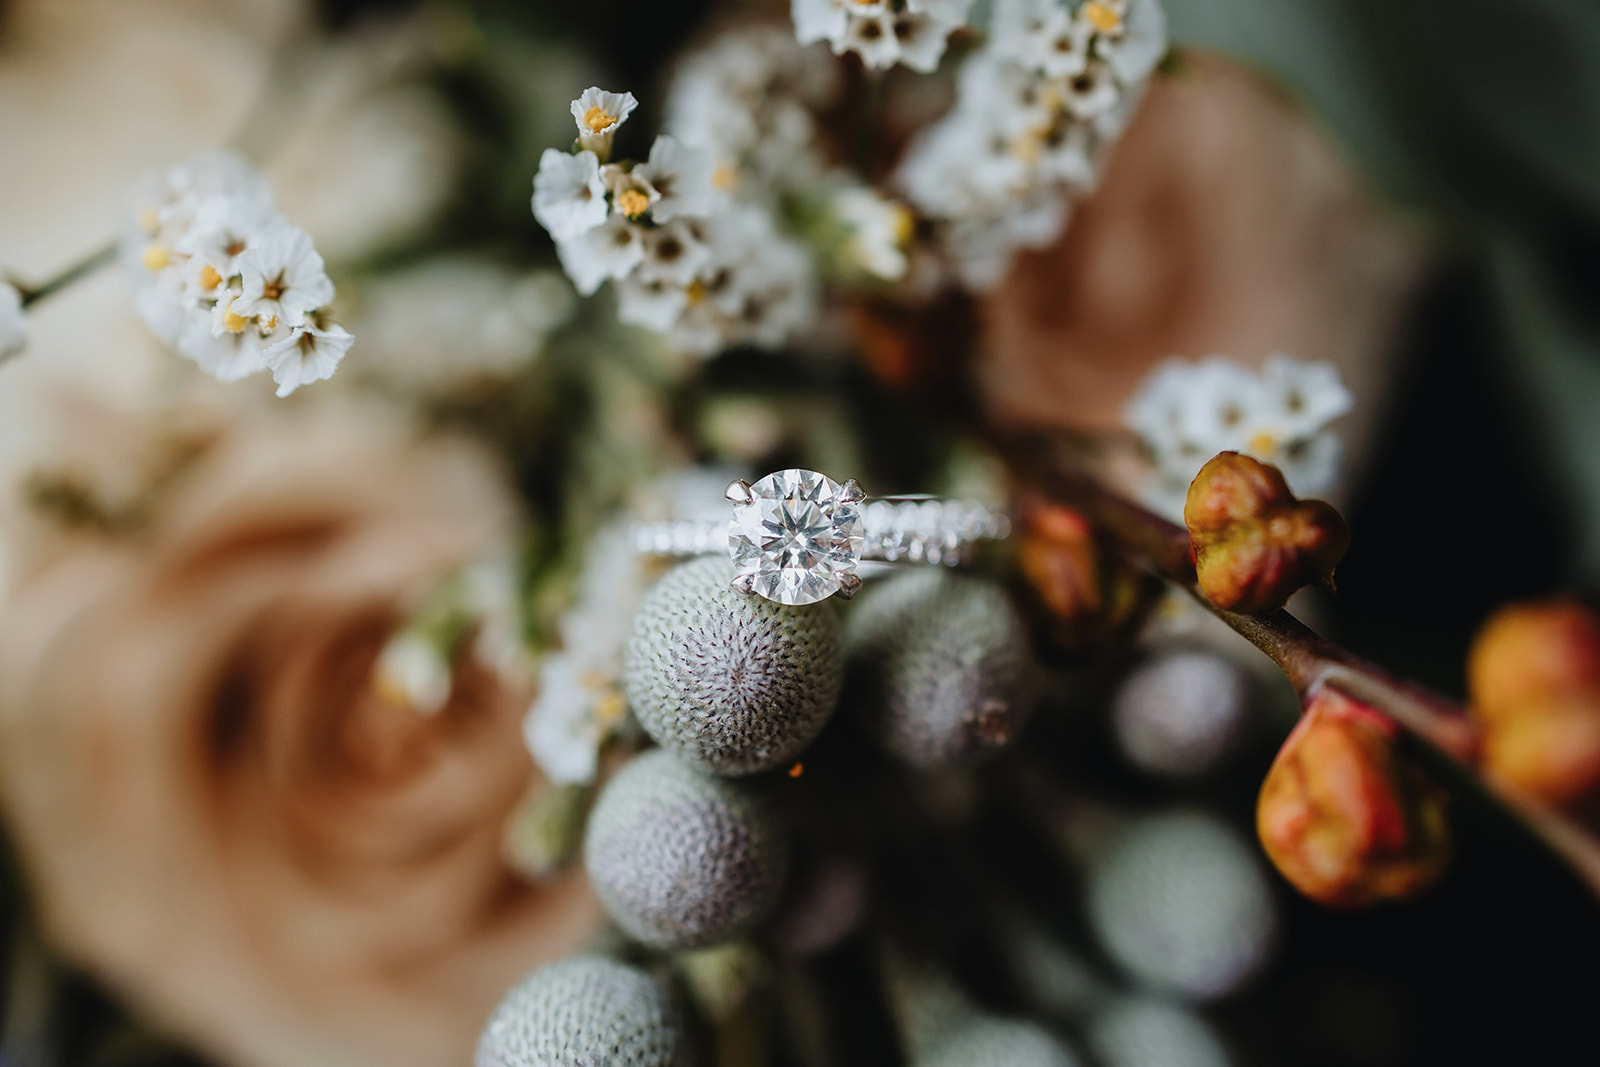 Details of a colorful wedding bouquet and close-ups of an engagement ring